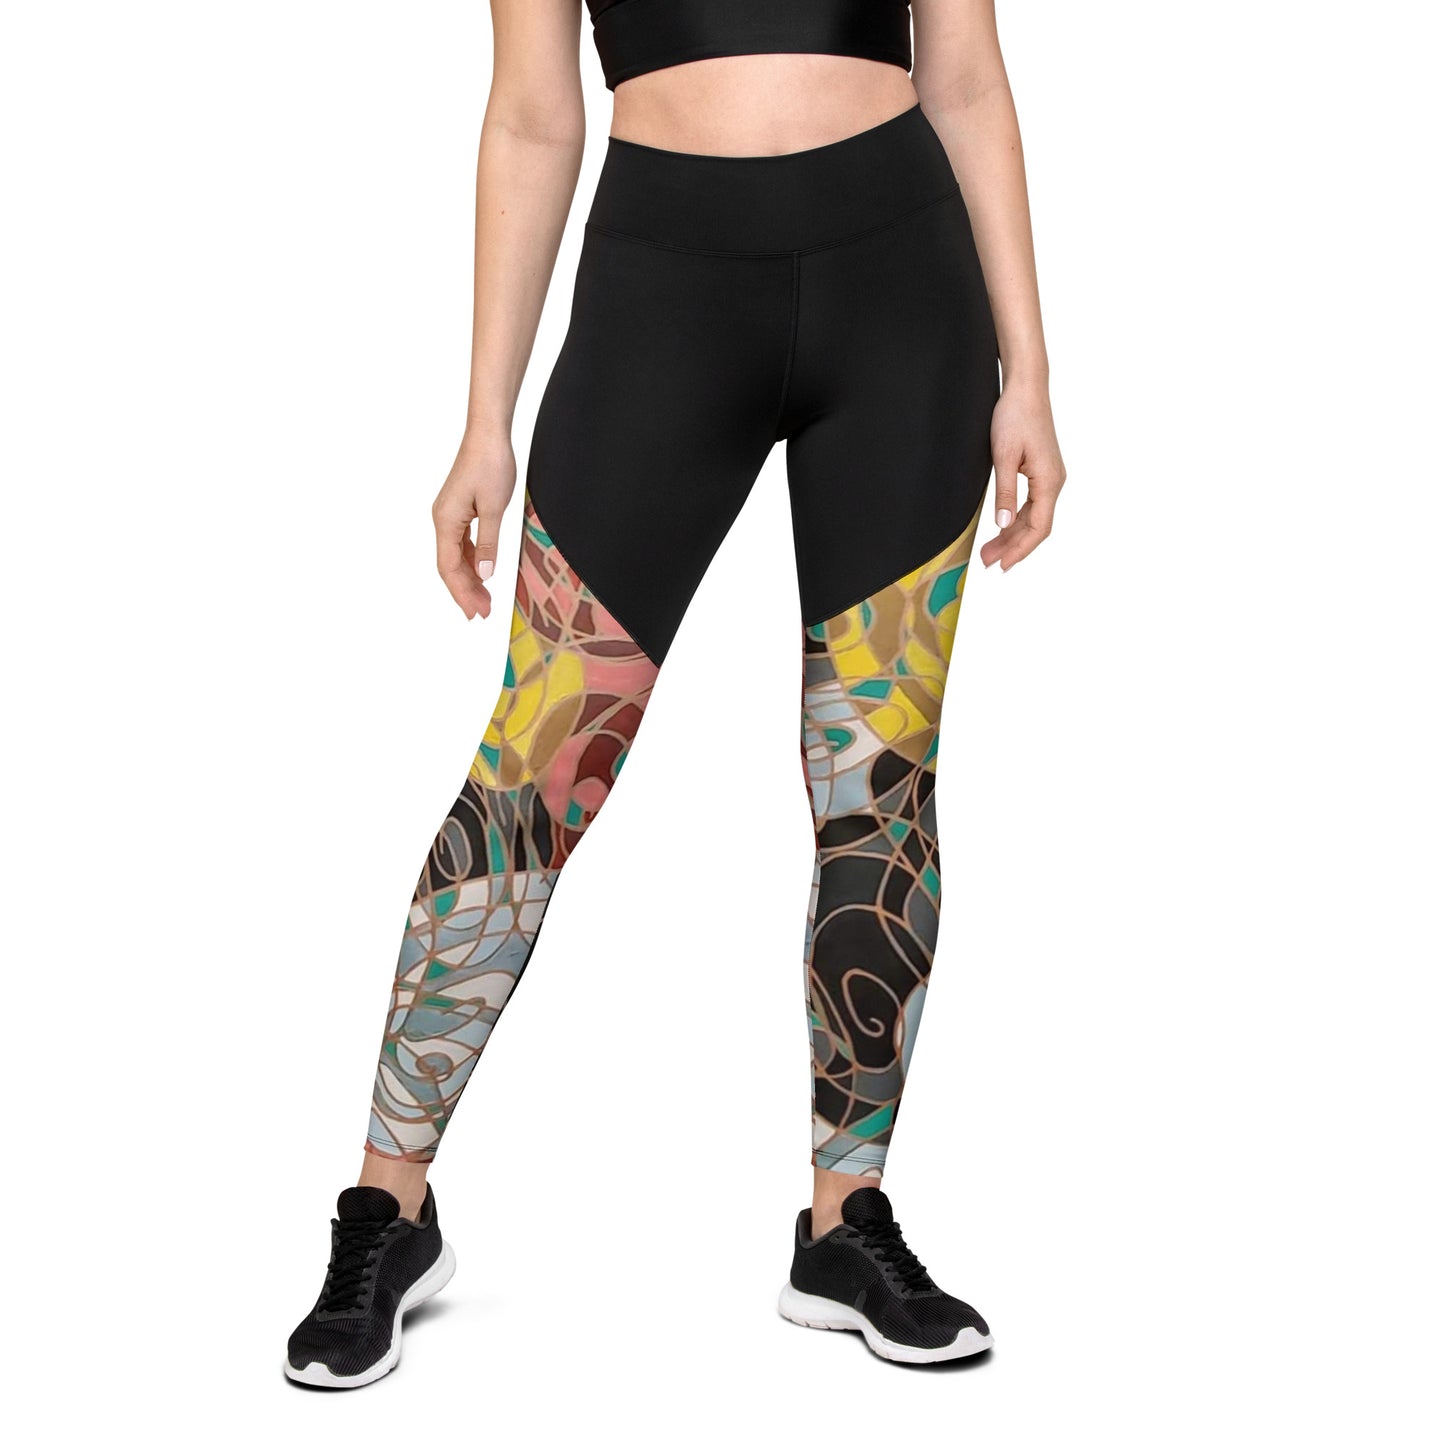 Red and Yellow, Black and White Sports Leggings